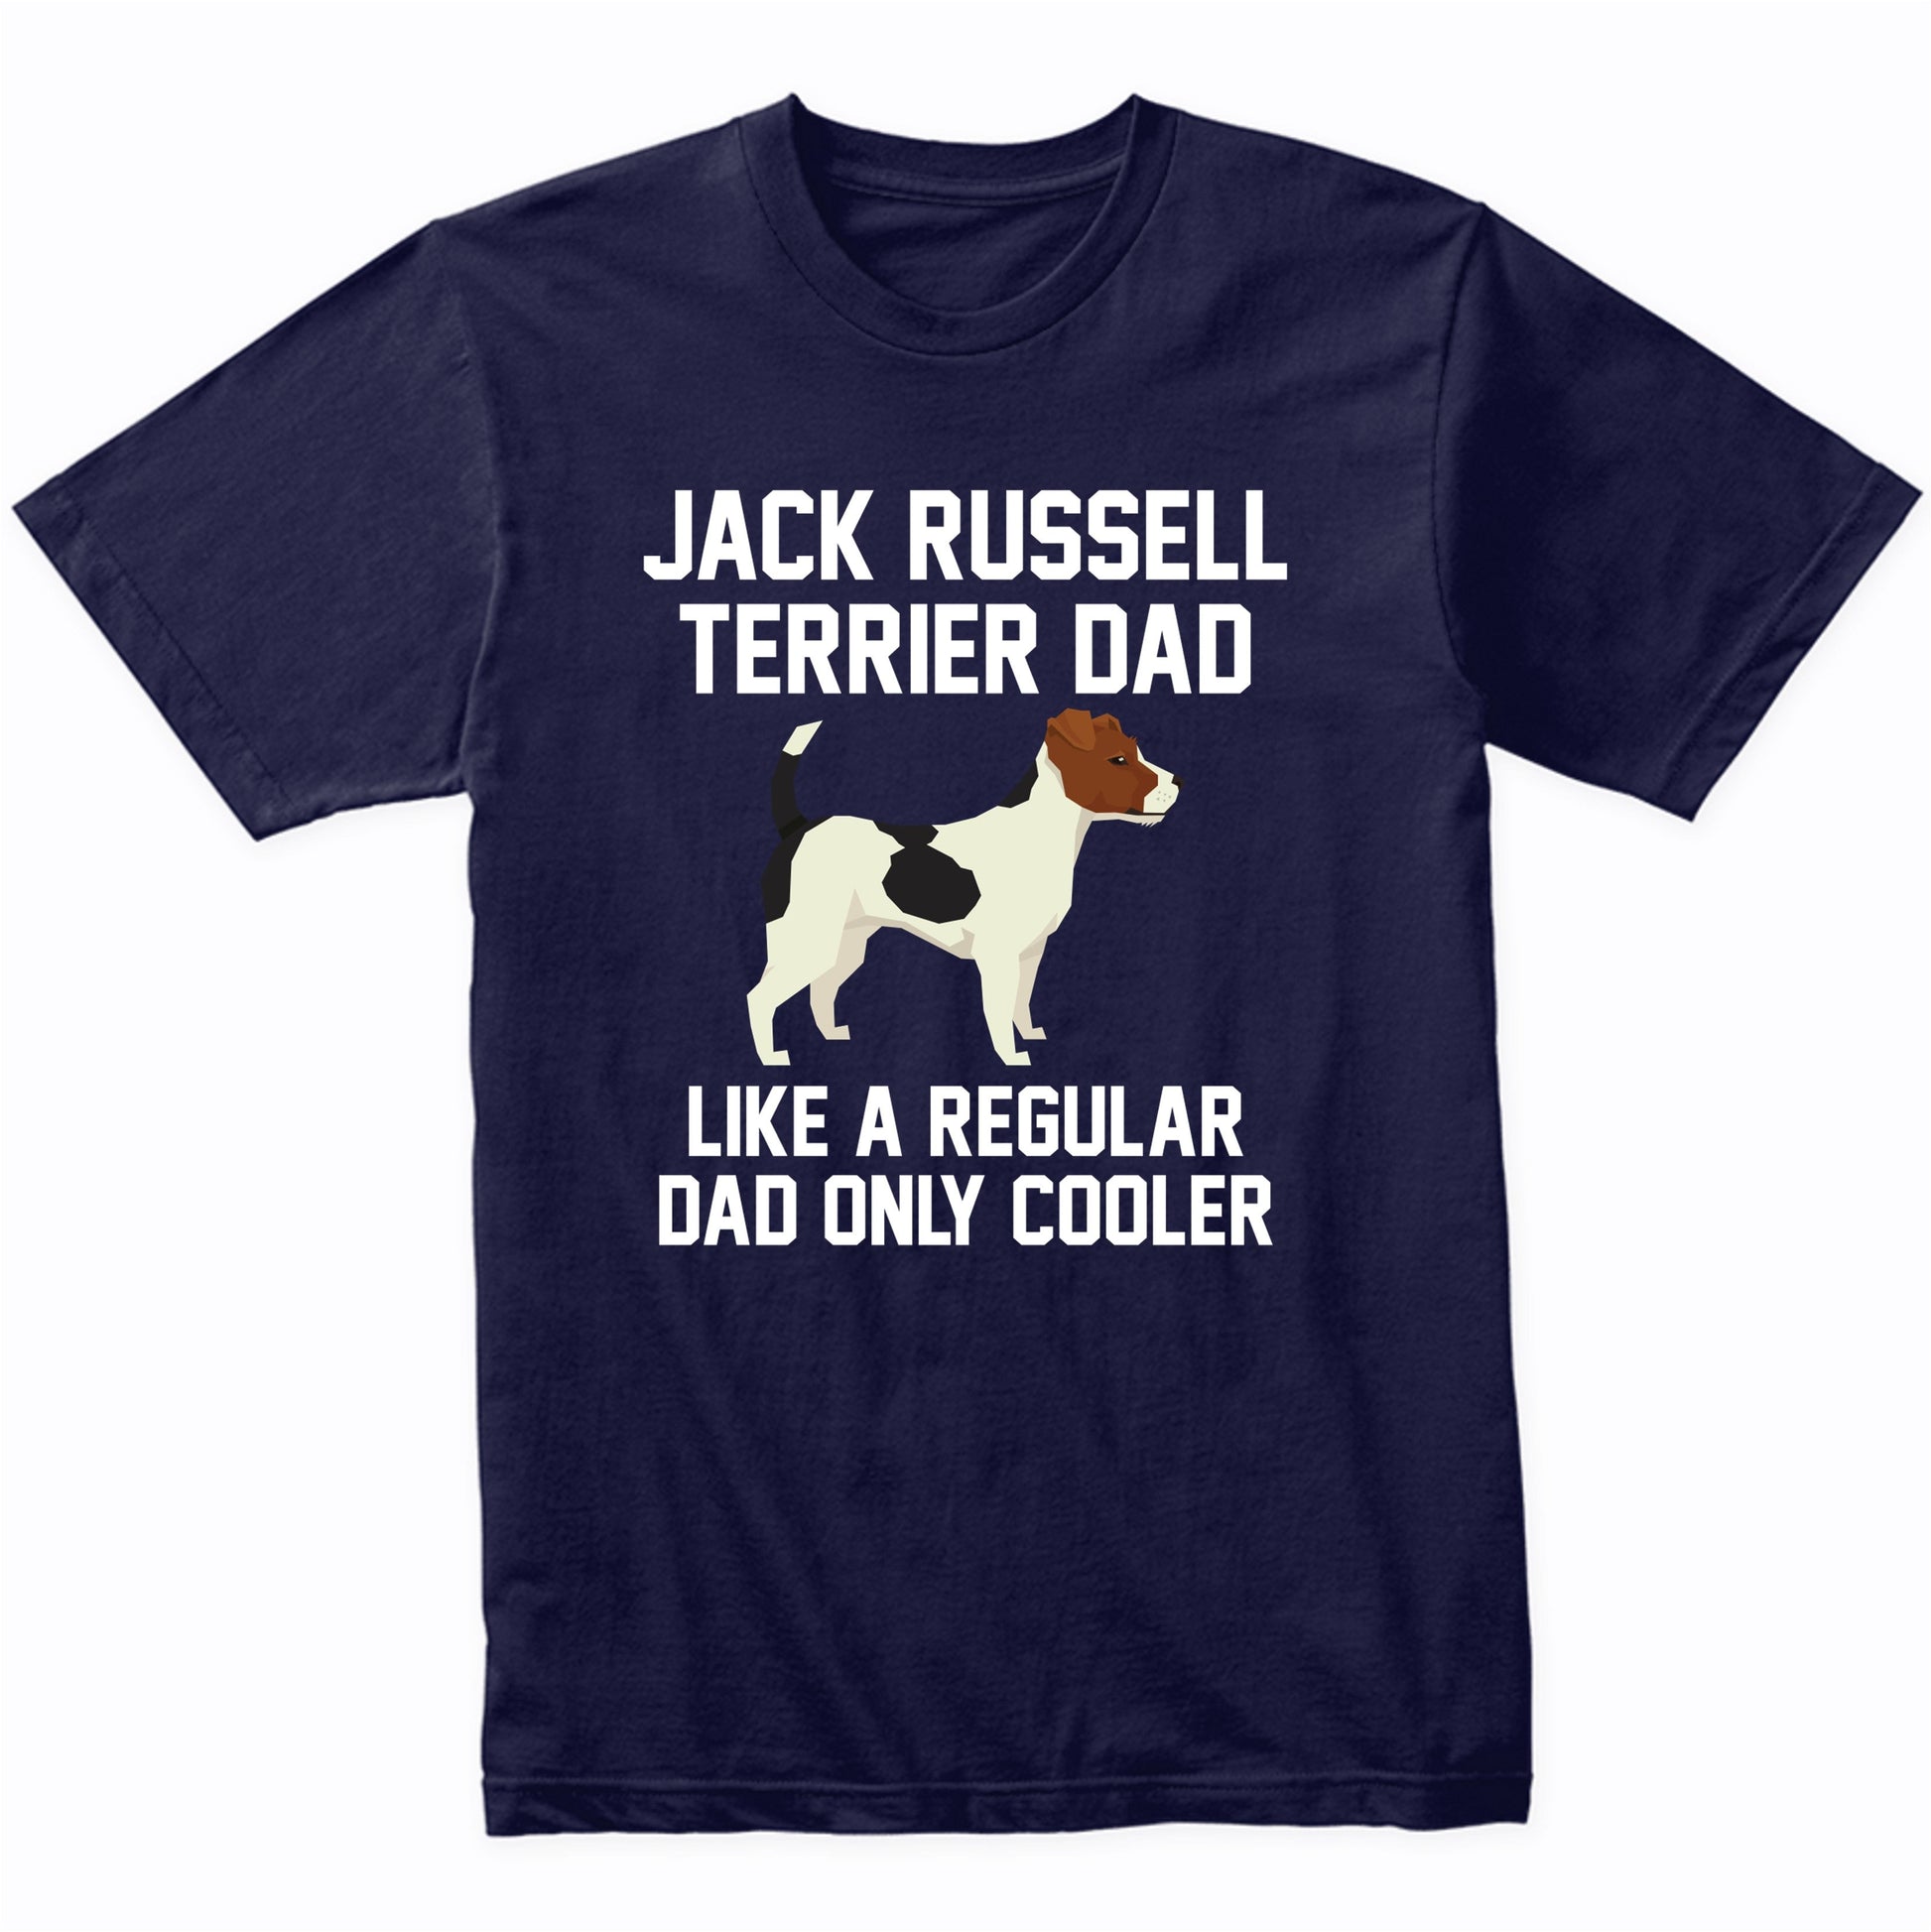 Jack Russell Terrier Shirt - Funny Jack Russell Terrier Dad T-Shirt